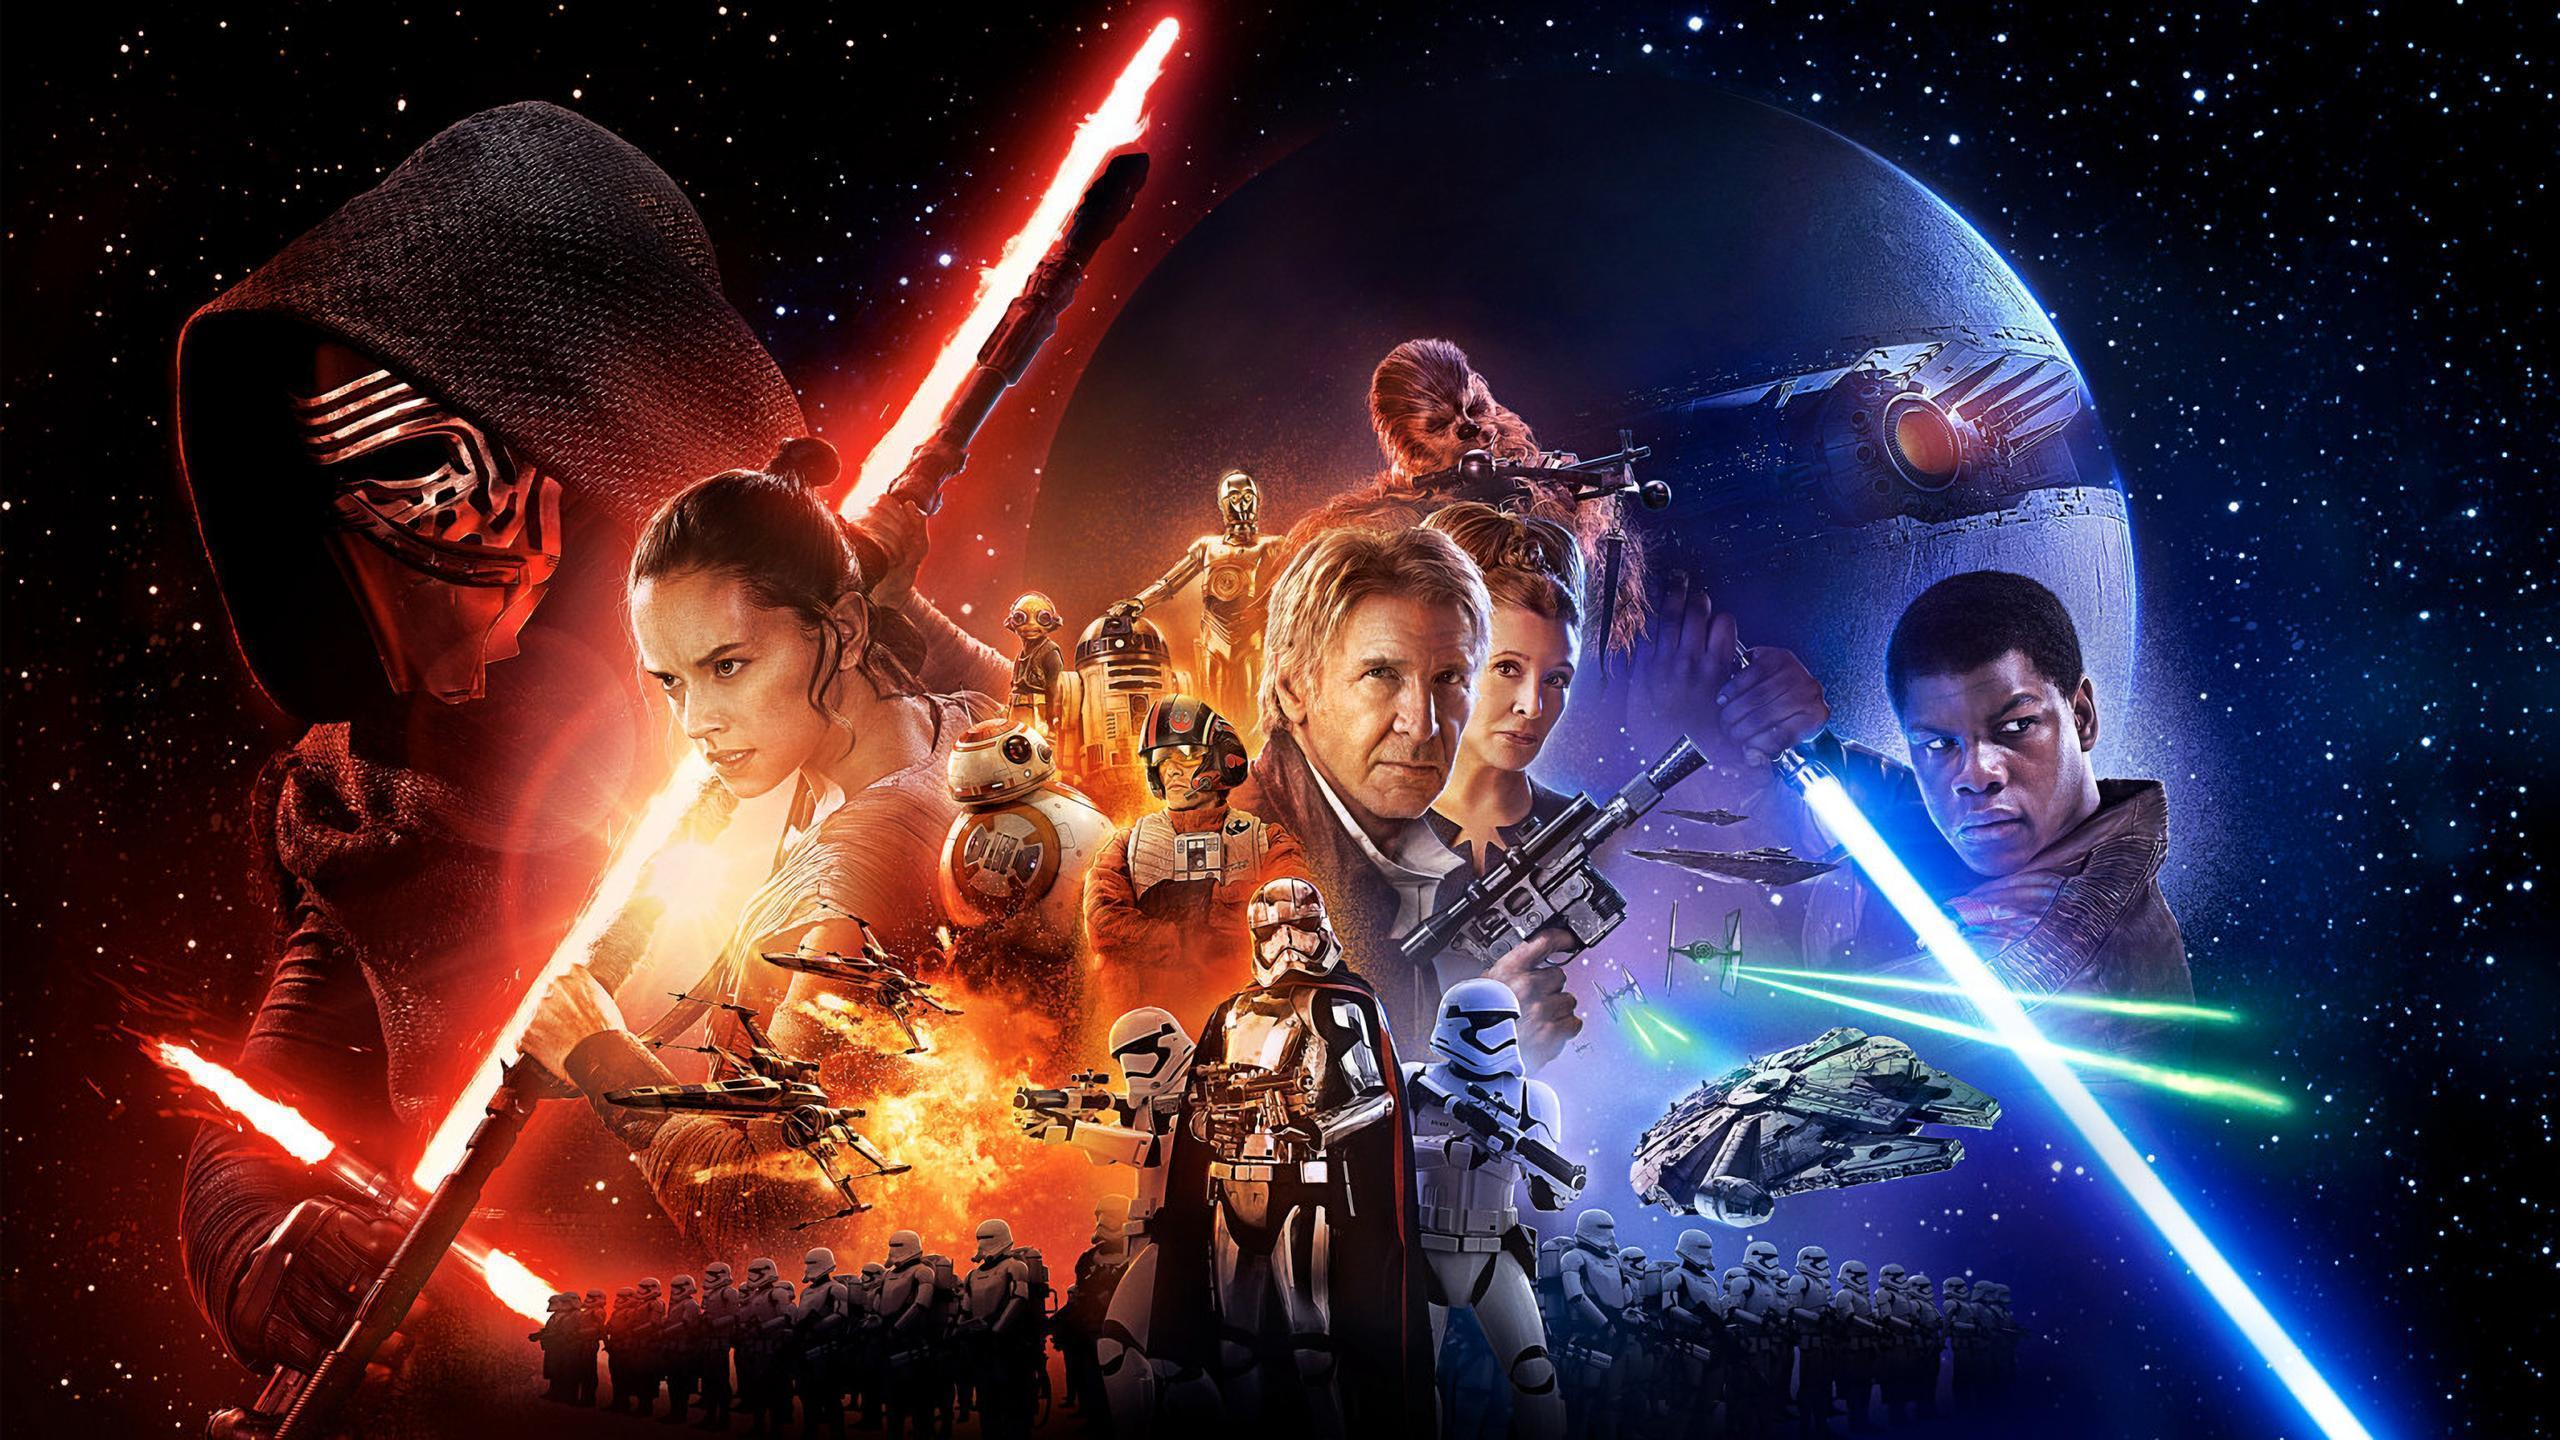 2560x1440 Star Wars: The Force Awakens Wallpapers